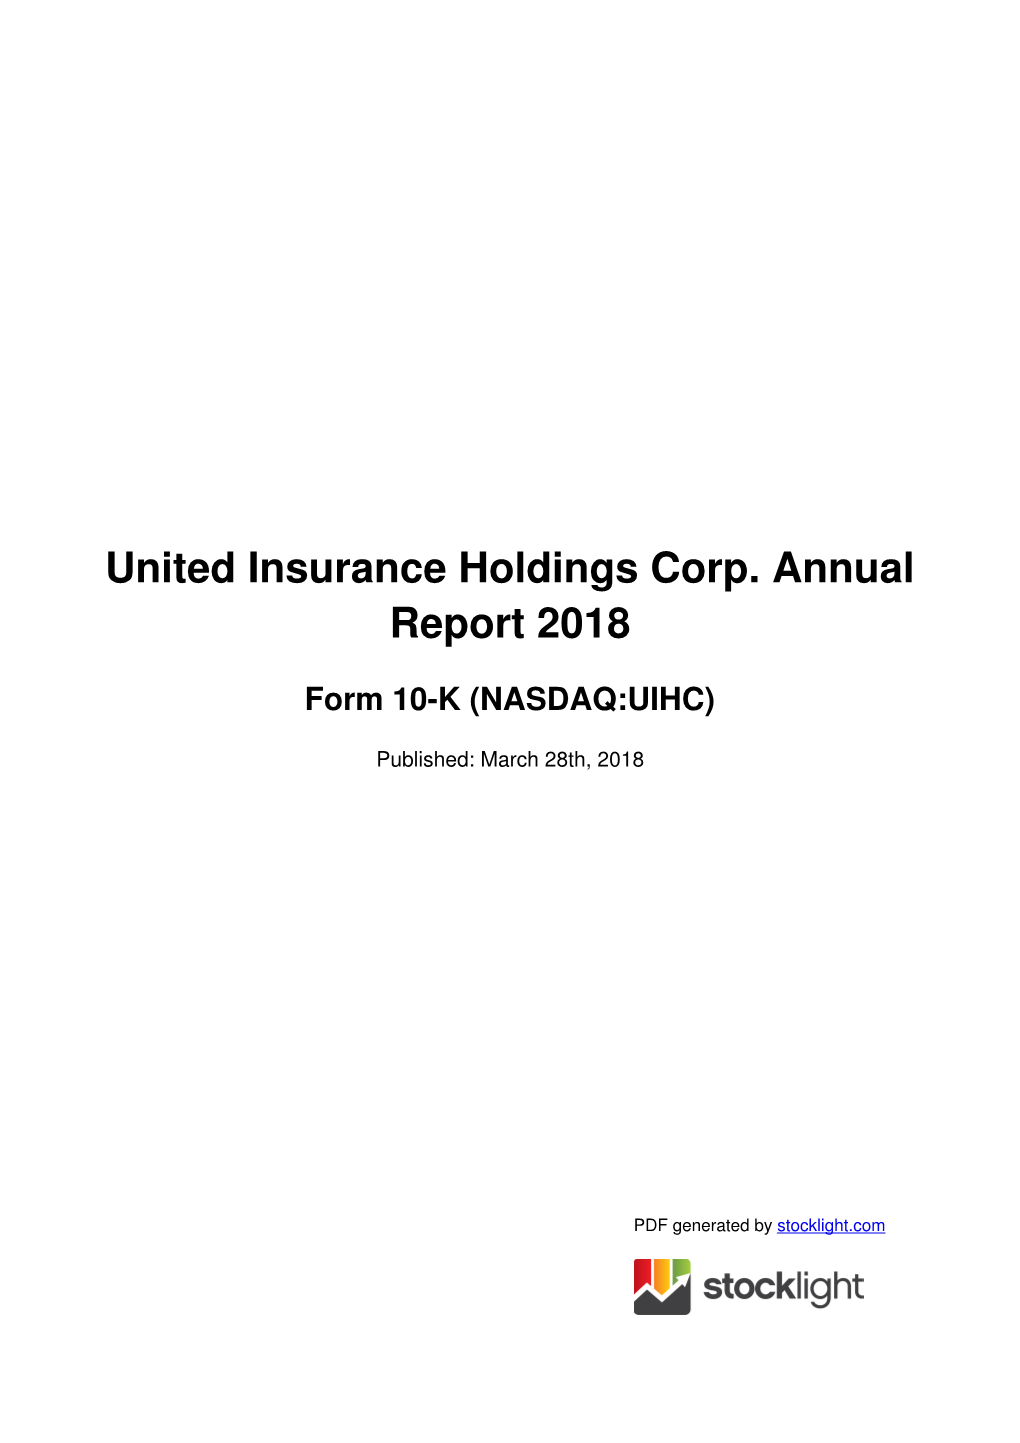 United Insurance Holdings Corp. Annual Report 2018